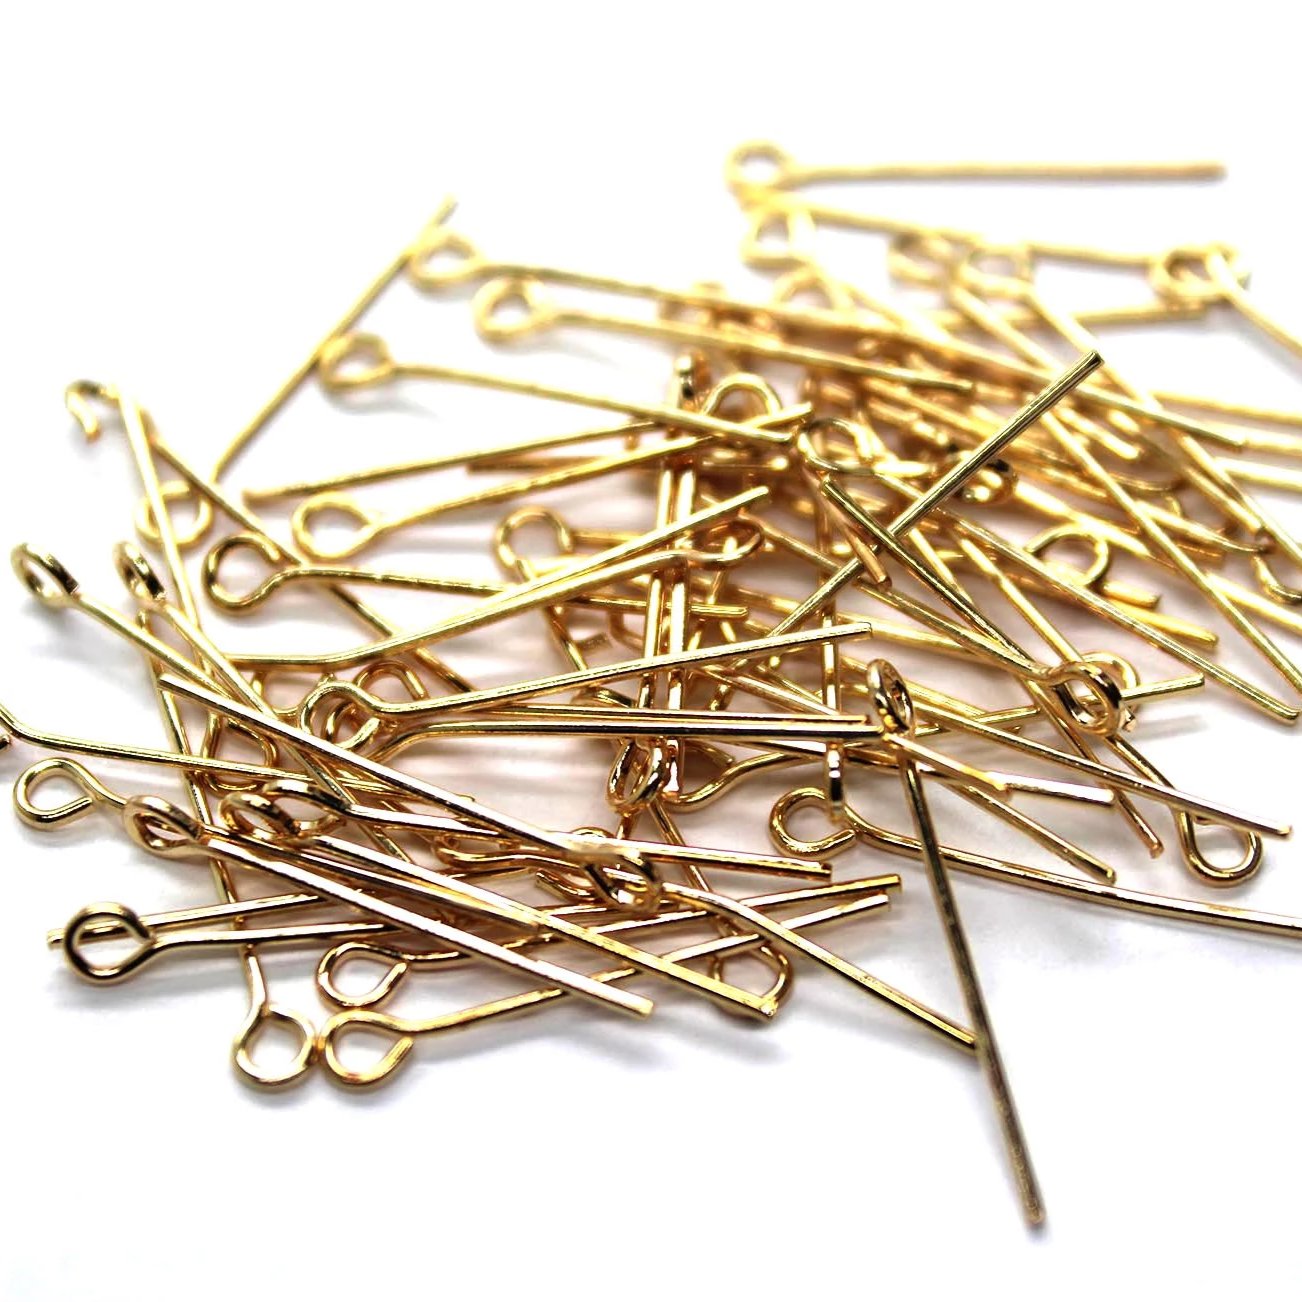 Eye Pins, Gold, Alloy, 0.86 inches, 22 Gauge, 60+pcs